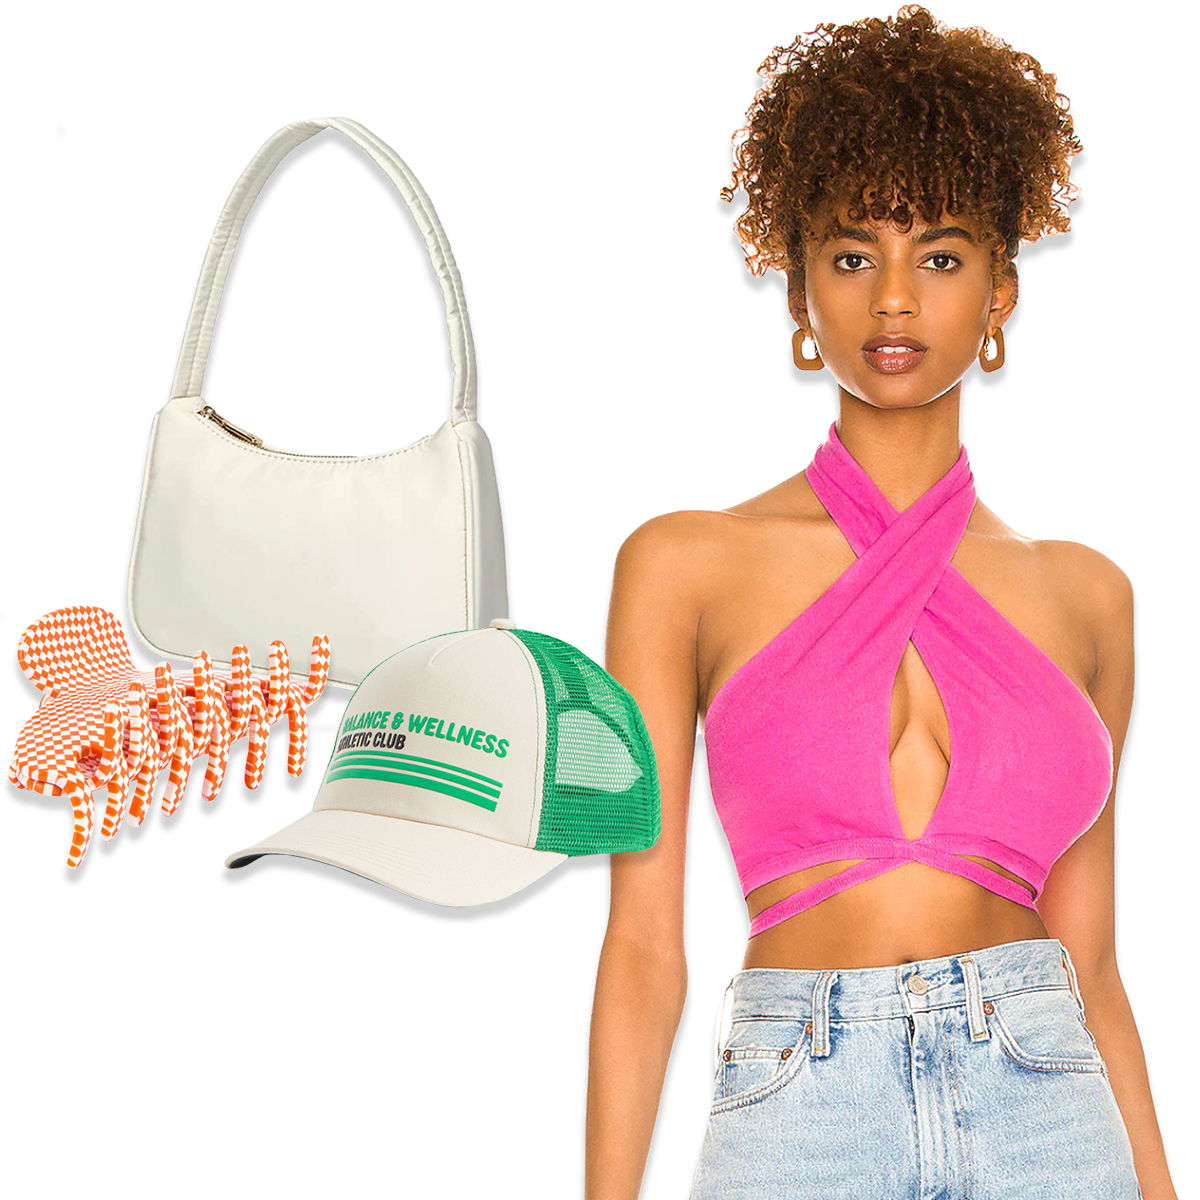 The 90s Shoulder Bag Has Become An It-Girl Must-Have